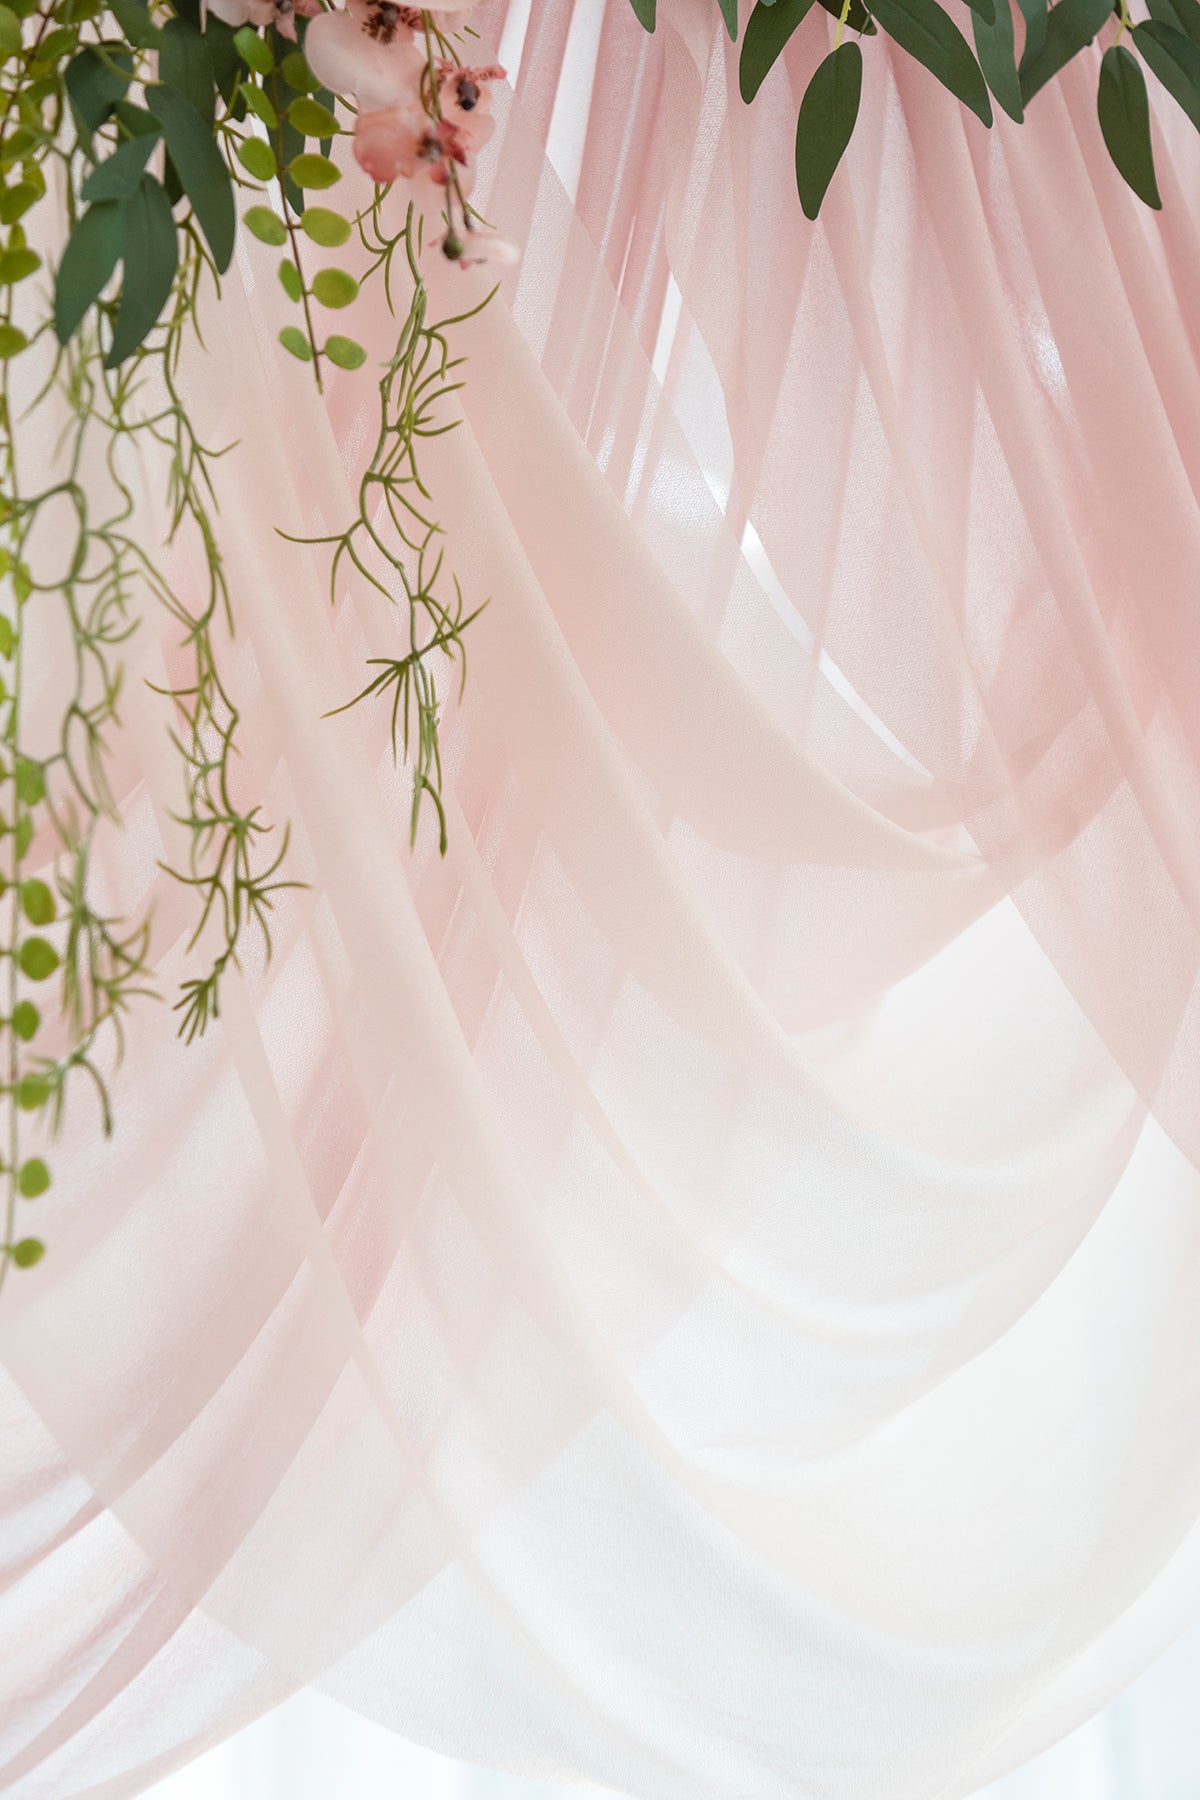 Wedding Arch Draping in Dusty Rose & Blush | Clearance